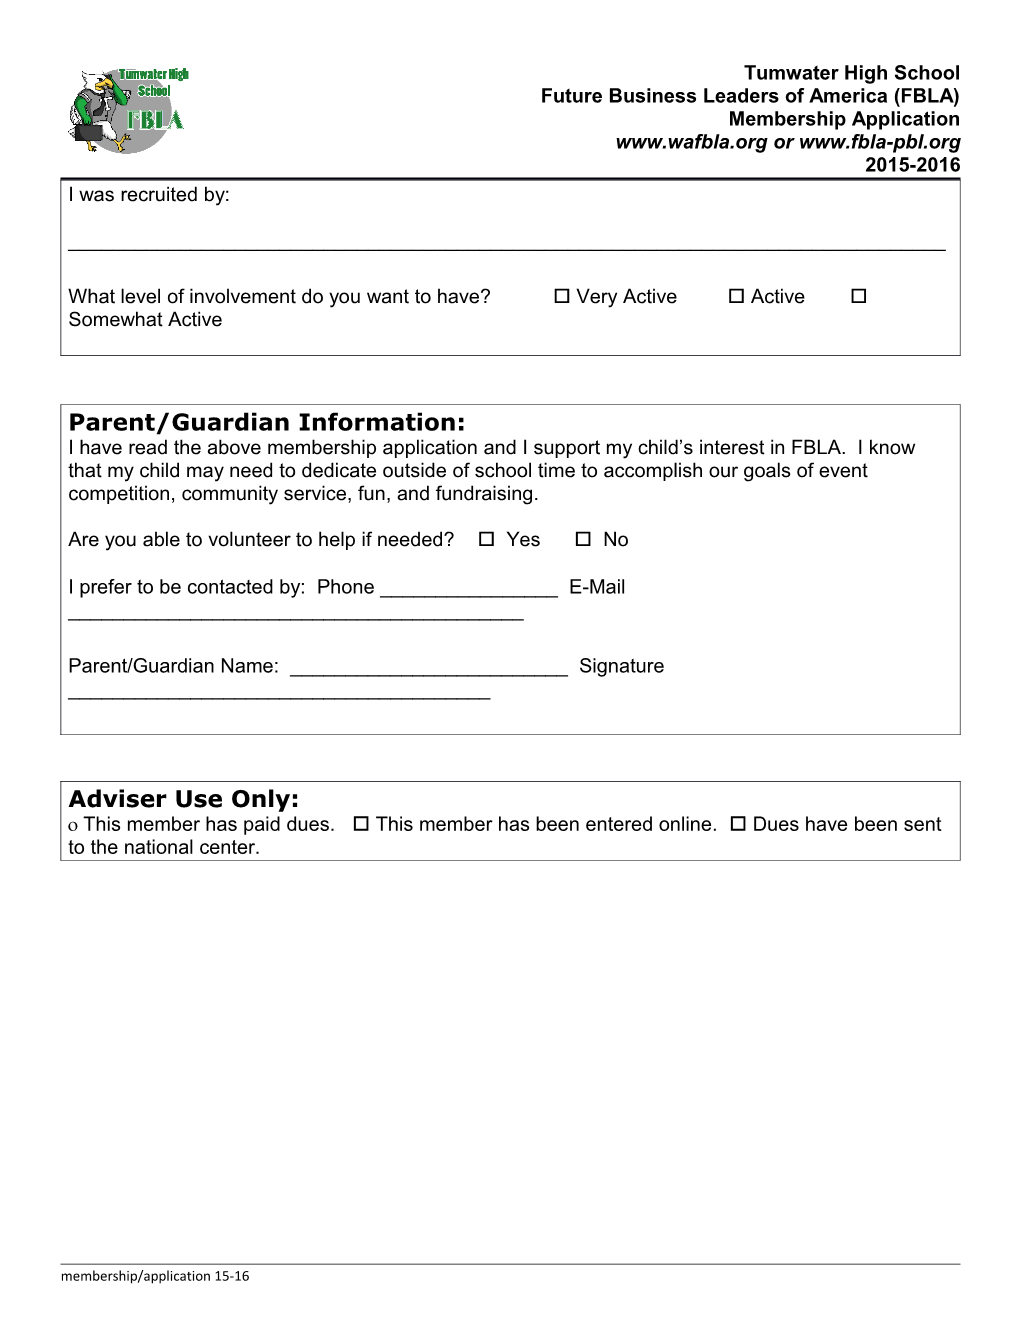 Fill out the Information Below